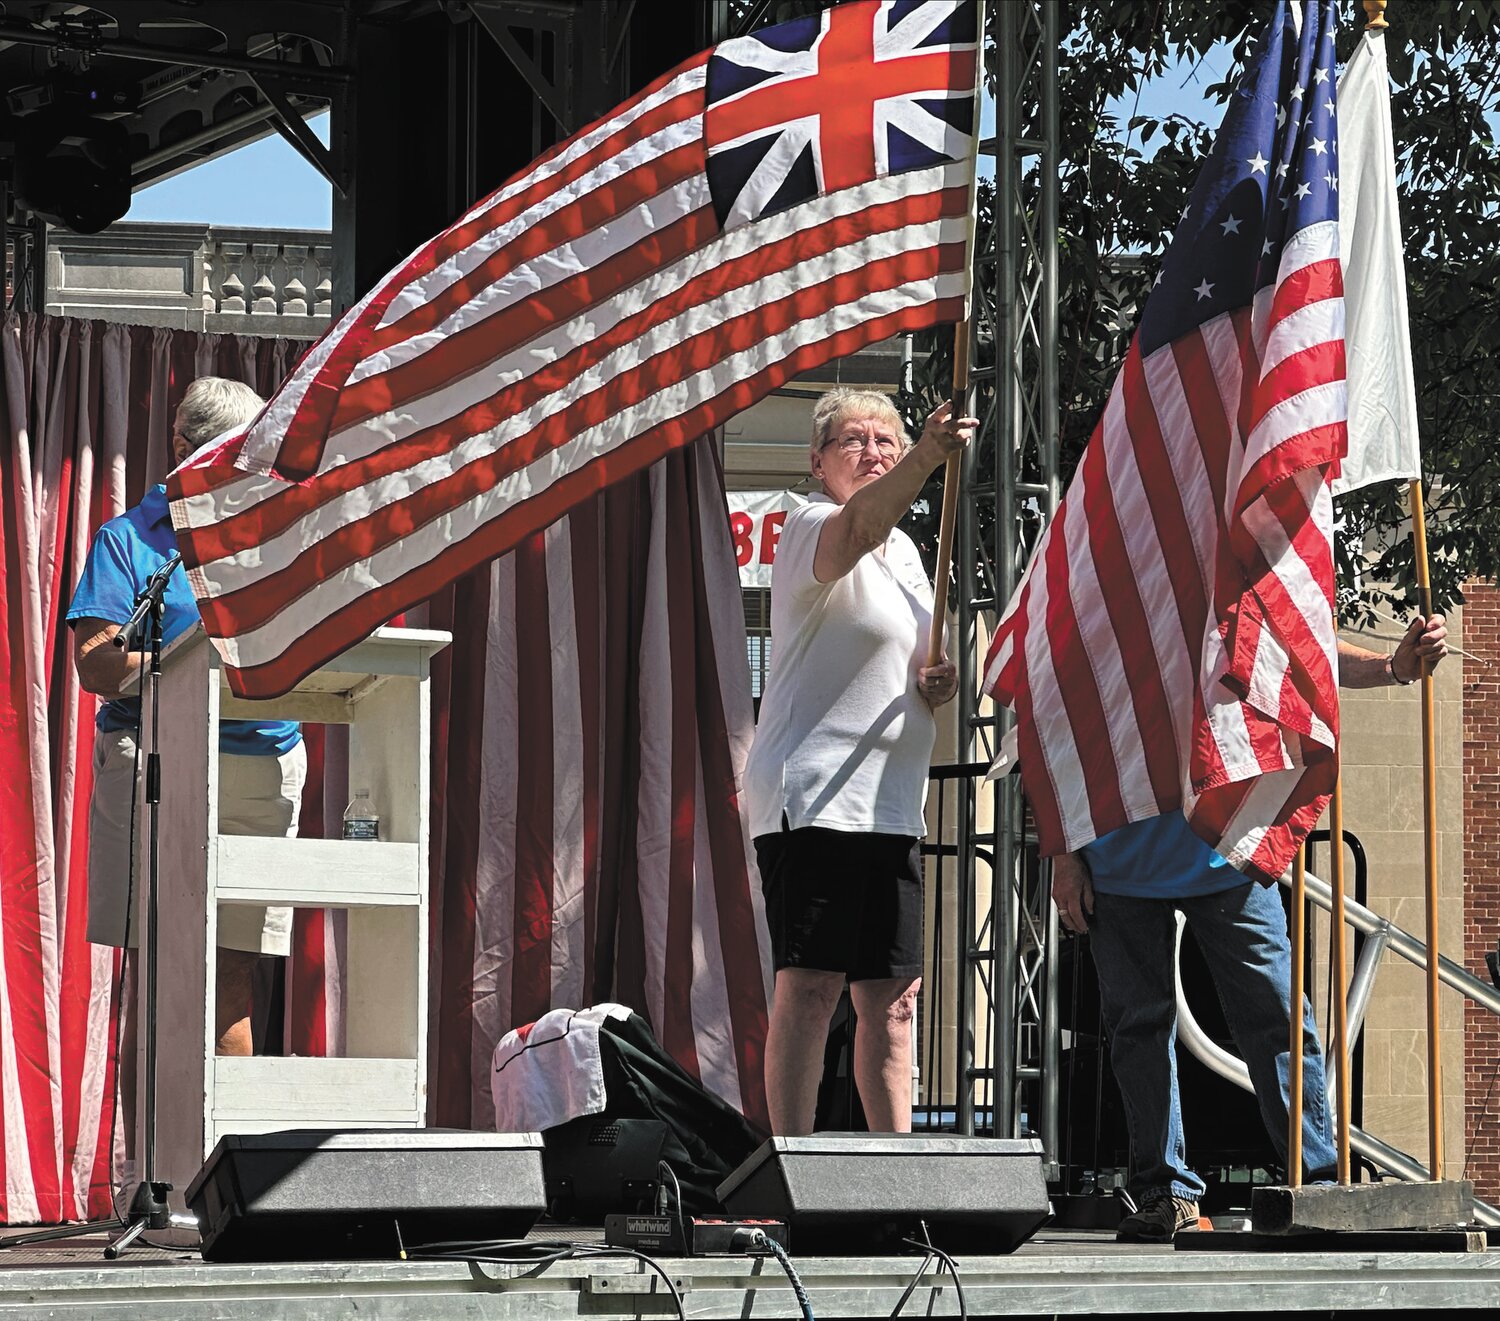 Members of the Elks condust a flag ceremony to open the annual Crawfordsville Strawberry Festival.